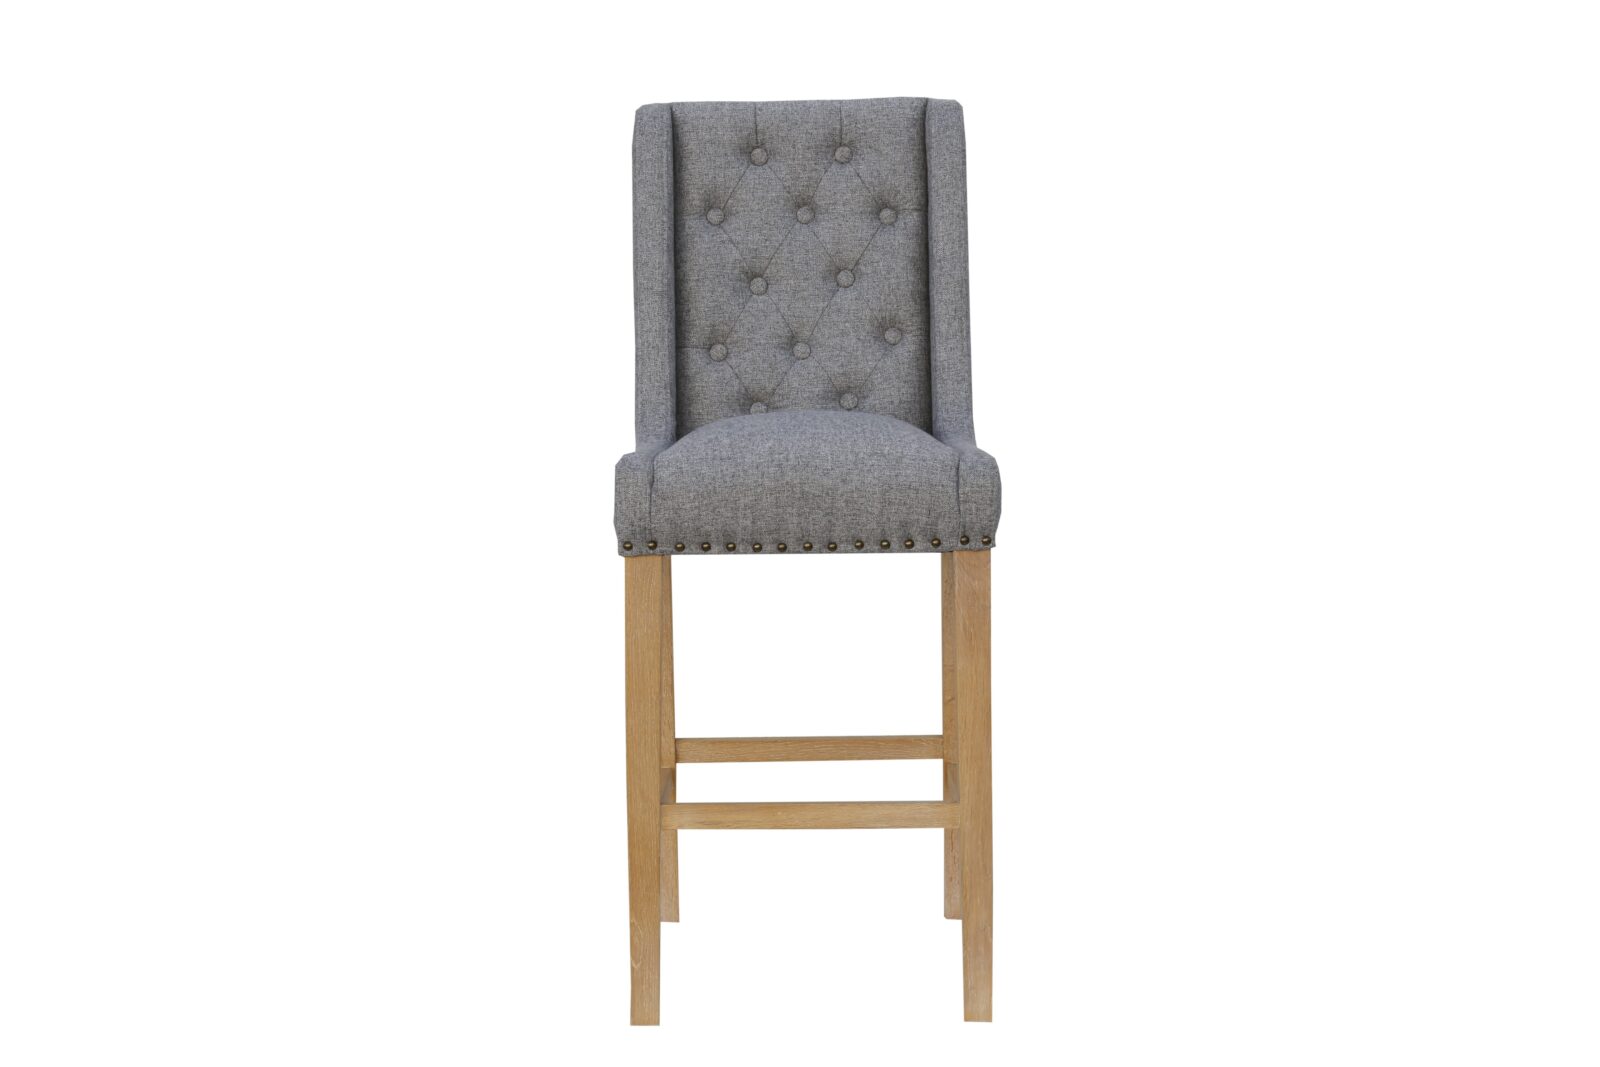 Kmore Light Grey Button Back Stool With Studs